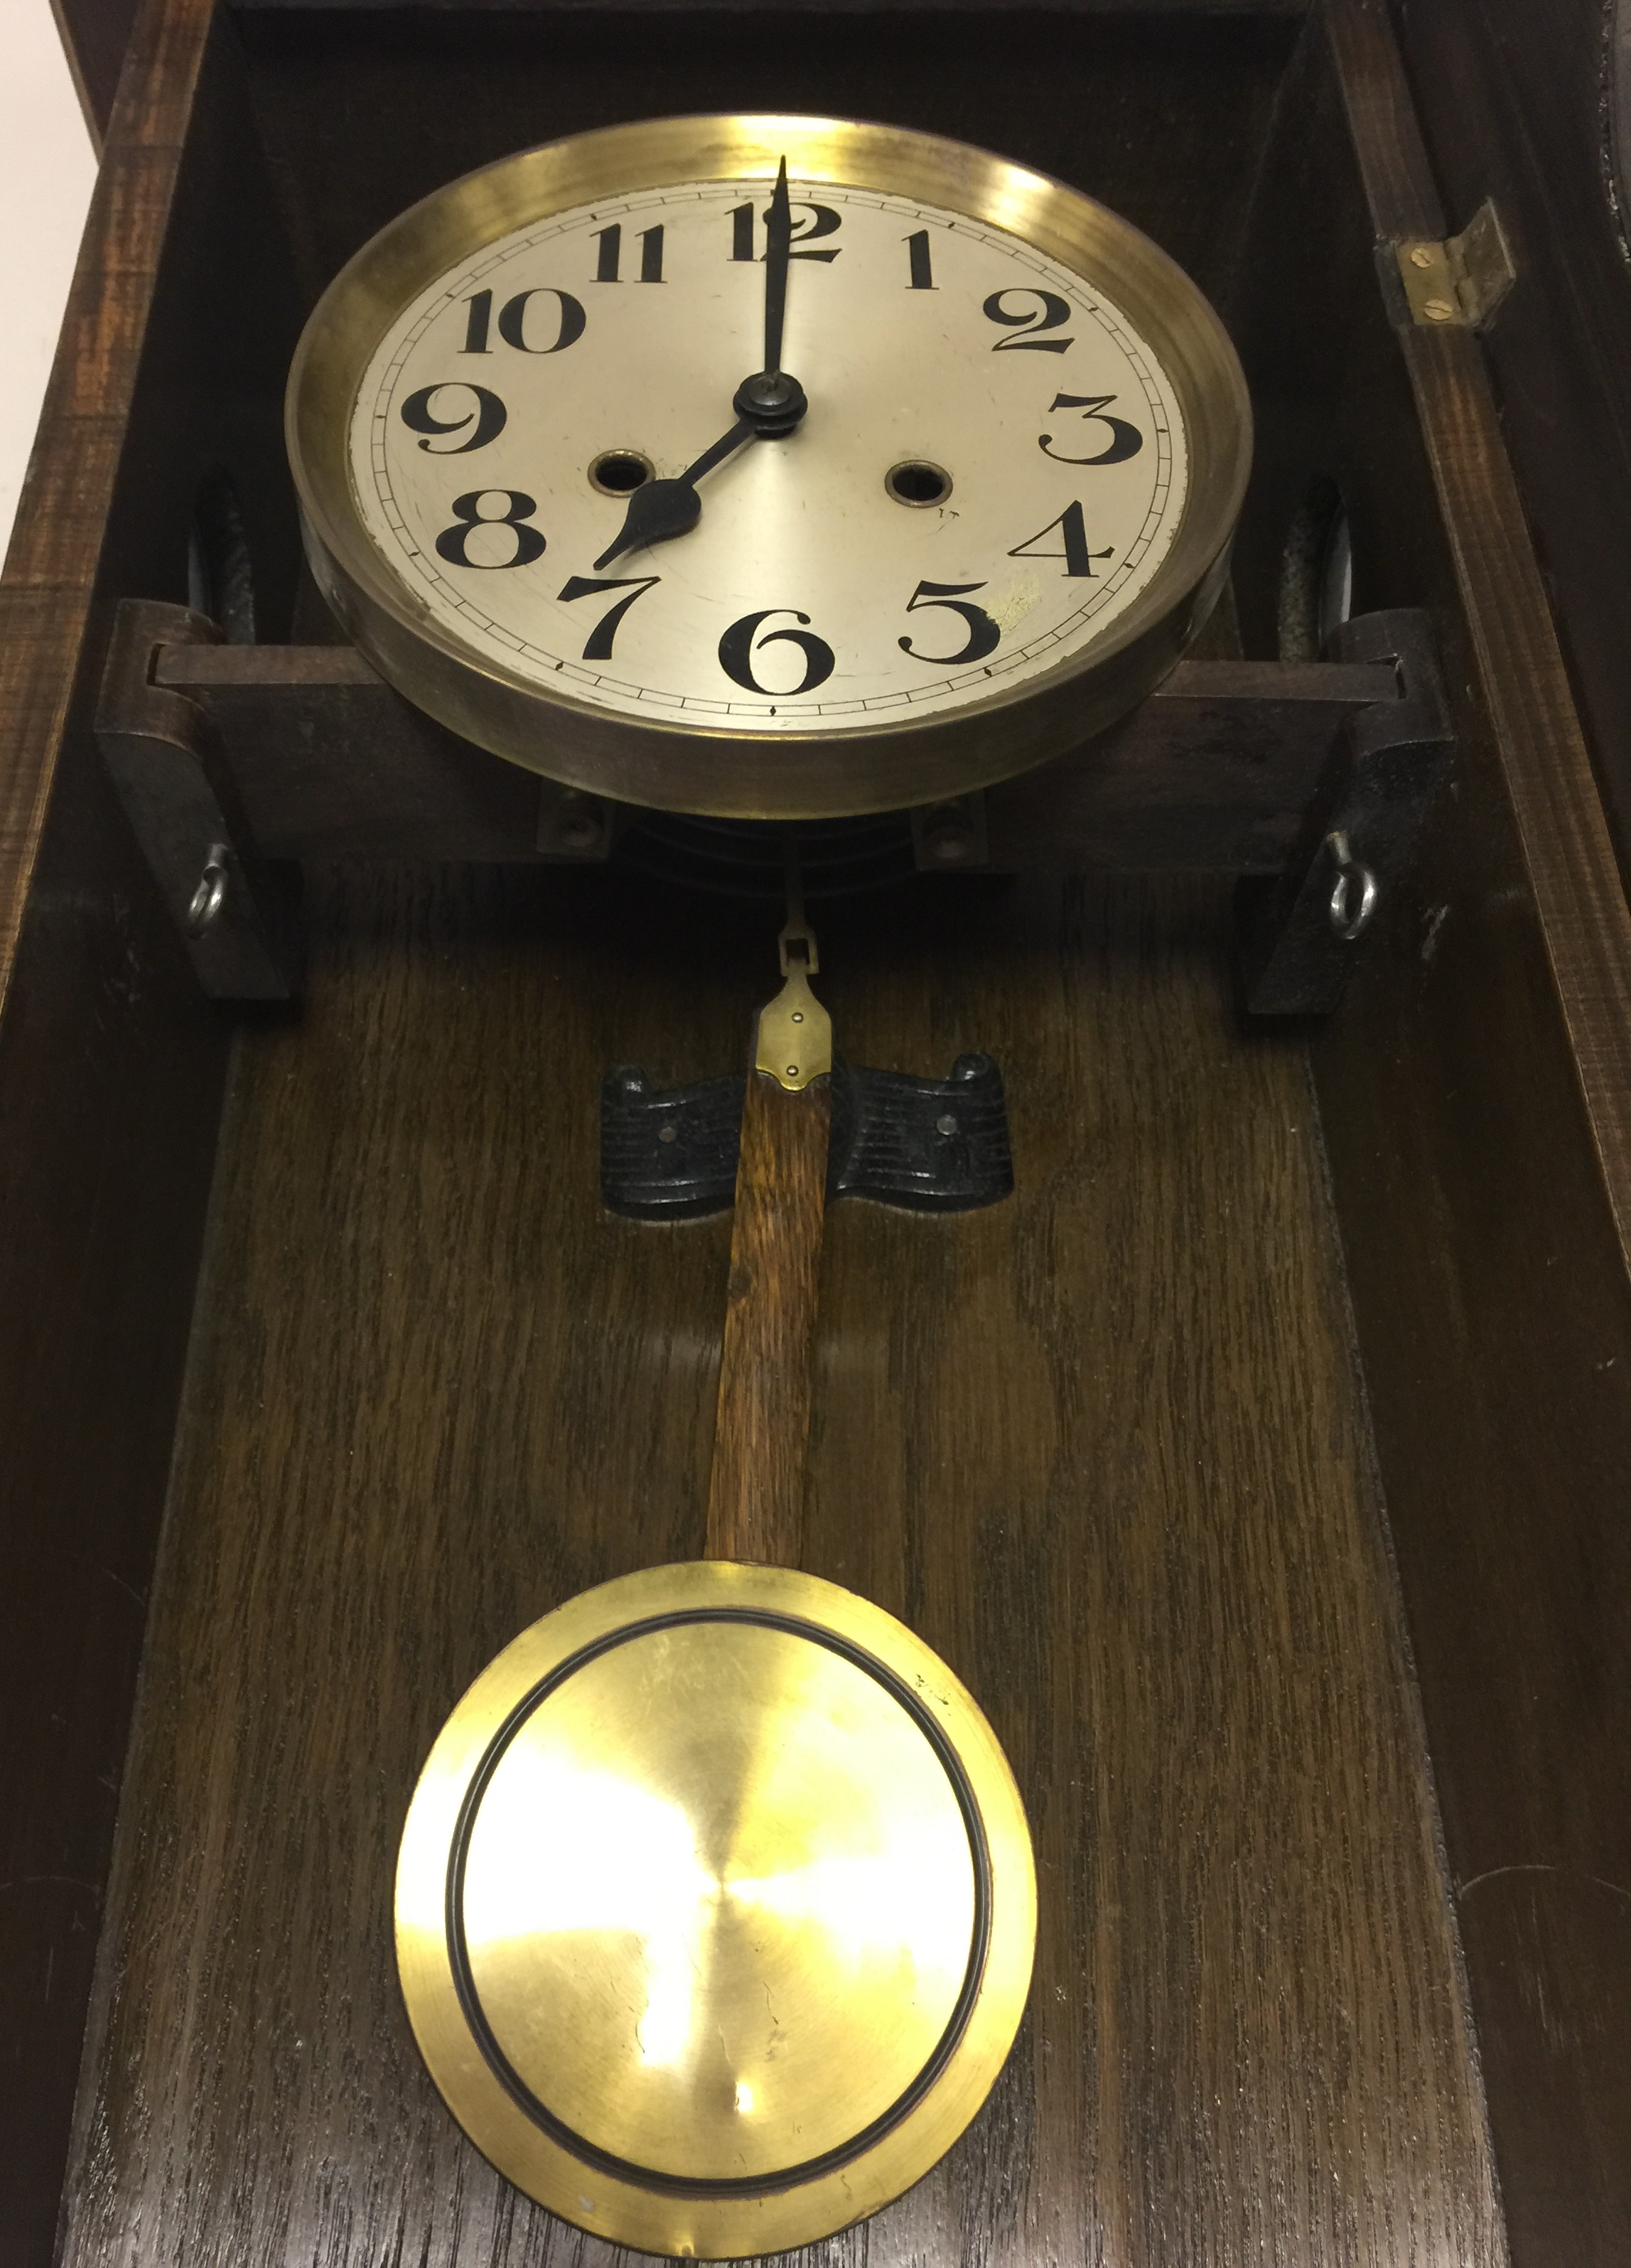 PAIR OF CLOCKS. An art deco style mantle clock with 'Westminster' chimes, marked 'Foreign' to face. - Image 2 of 4